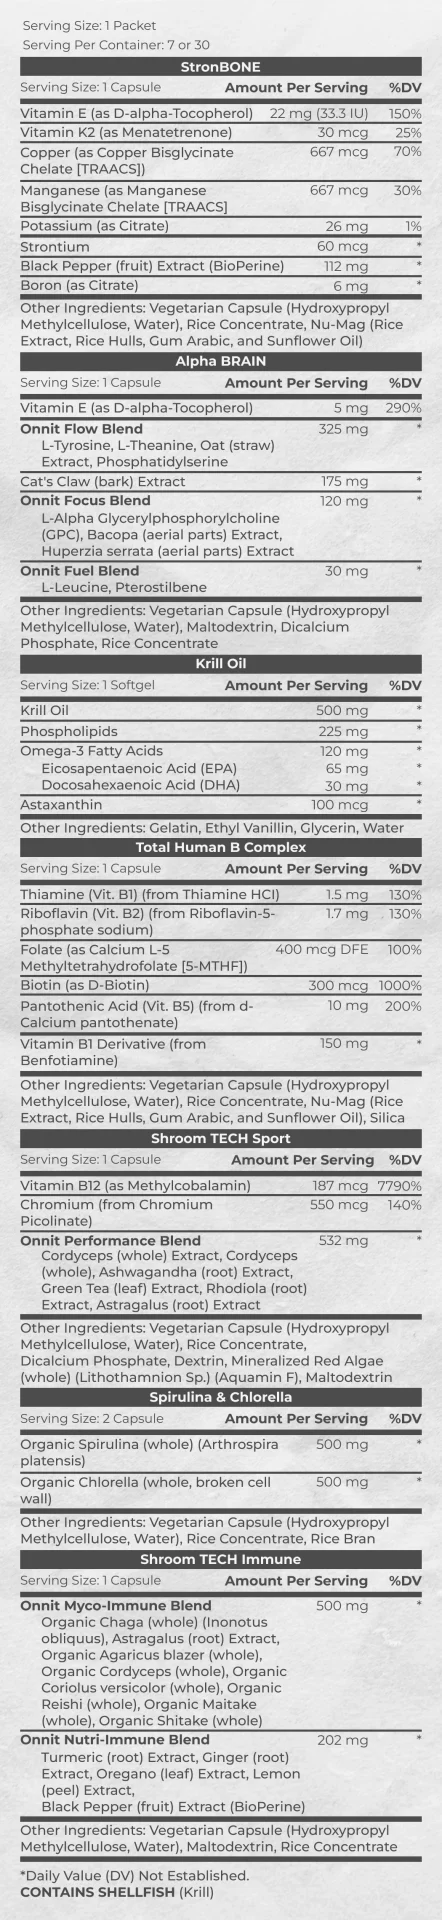 Supplement Facts of Total Human for Day Pack